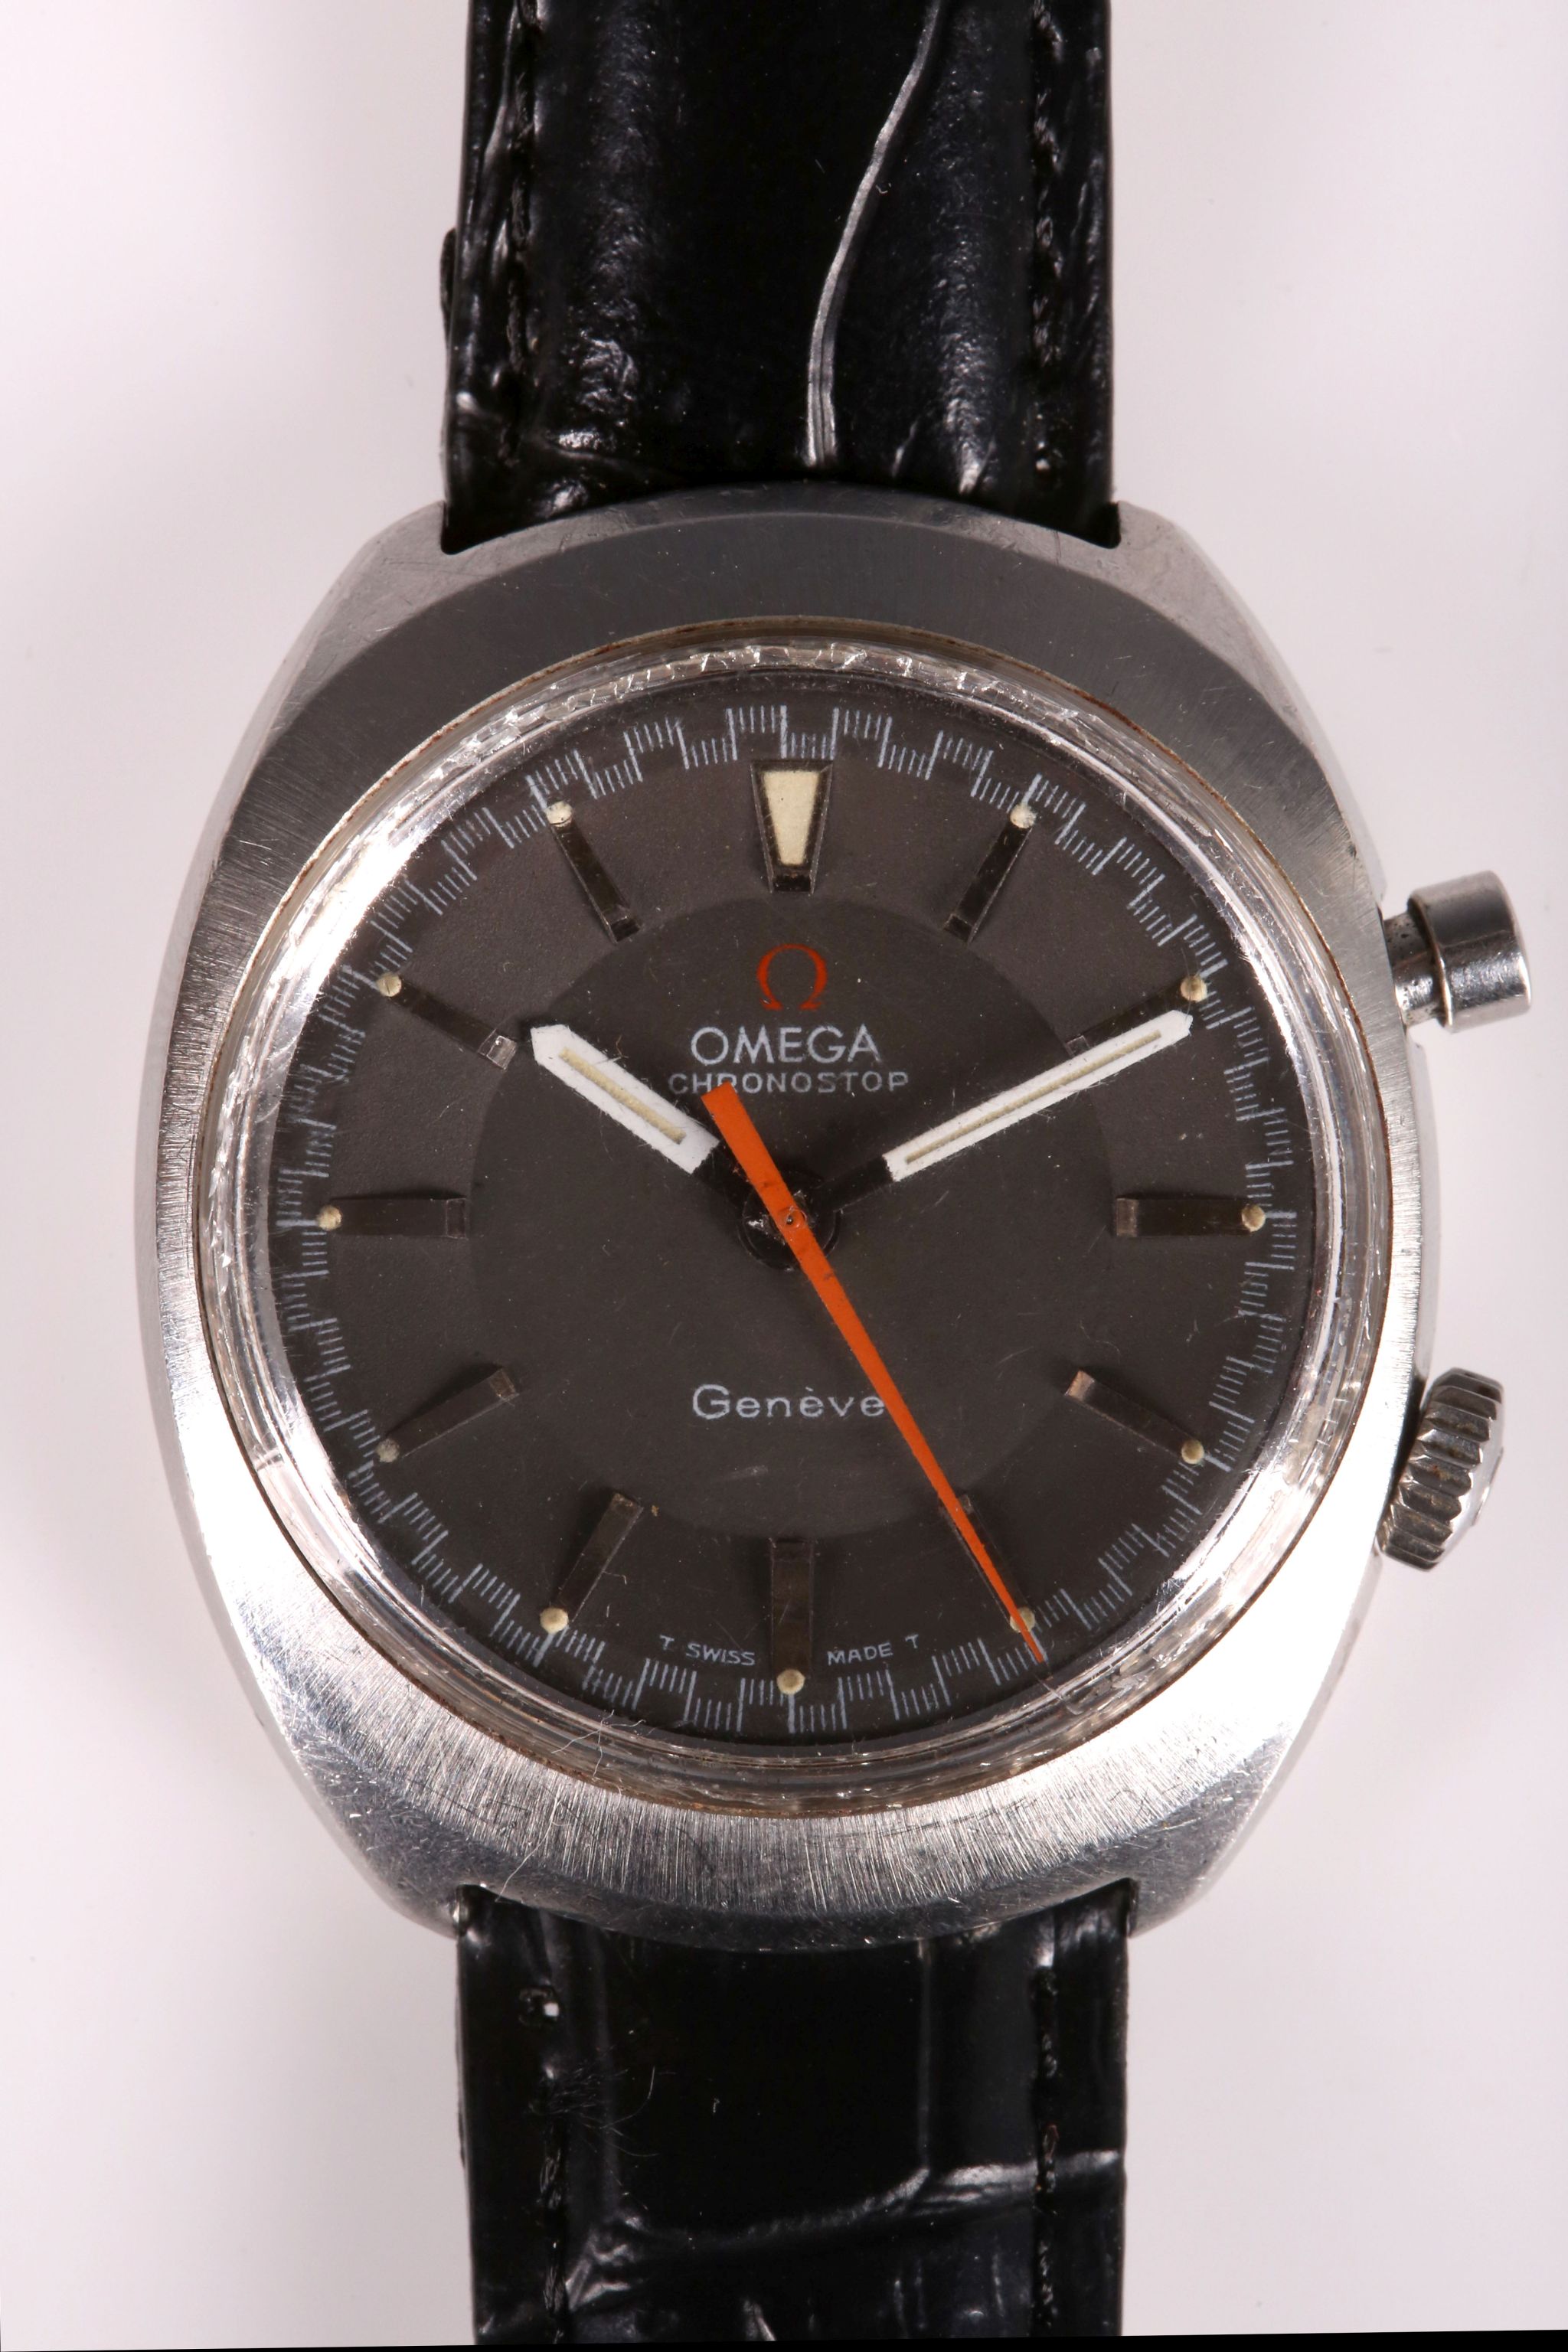 A circa 1970s Omega chrono stop wristwatch in stainless steel, later strap.